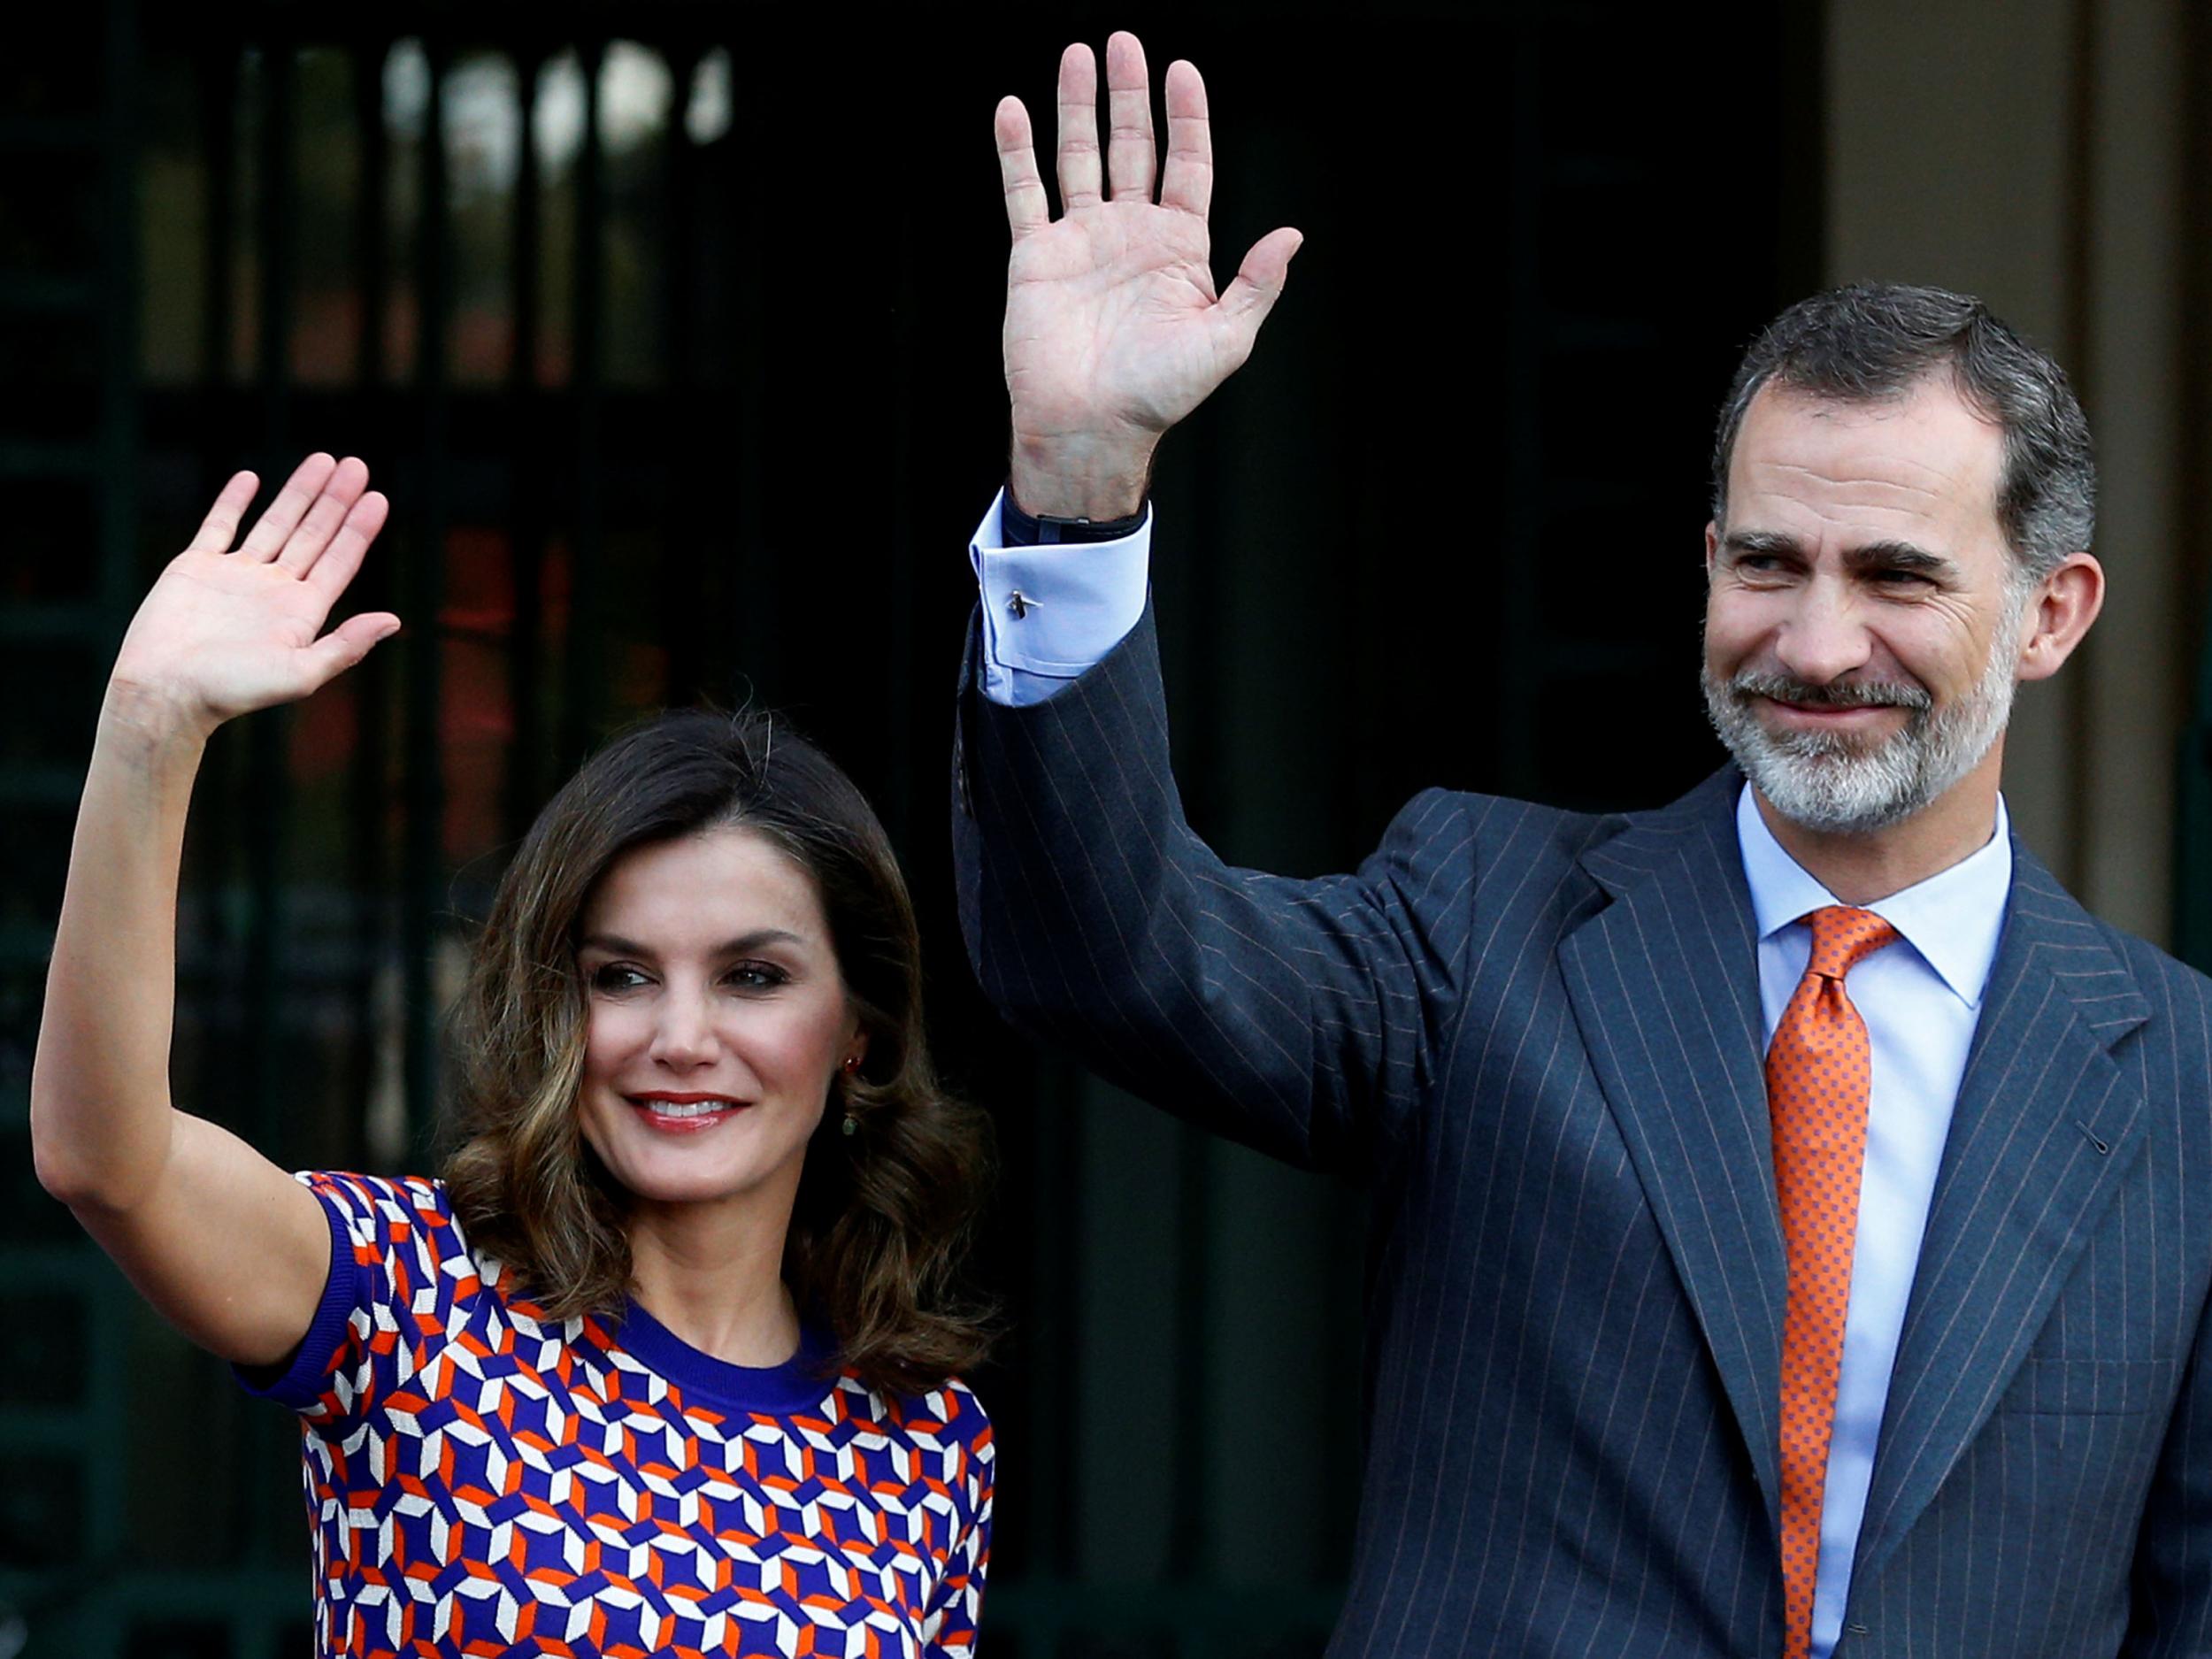 Spain's King Felipe VI and Queen Letizia wave as they arrive at the Cabildo in New Orleans, Louisiana, on 15 June 2018